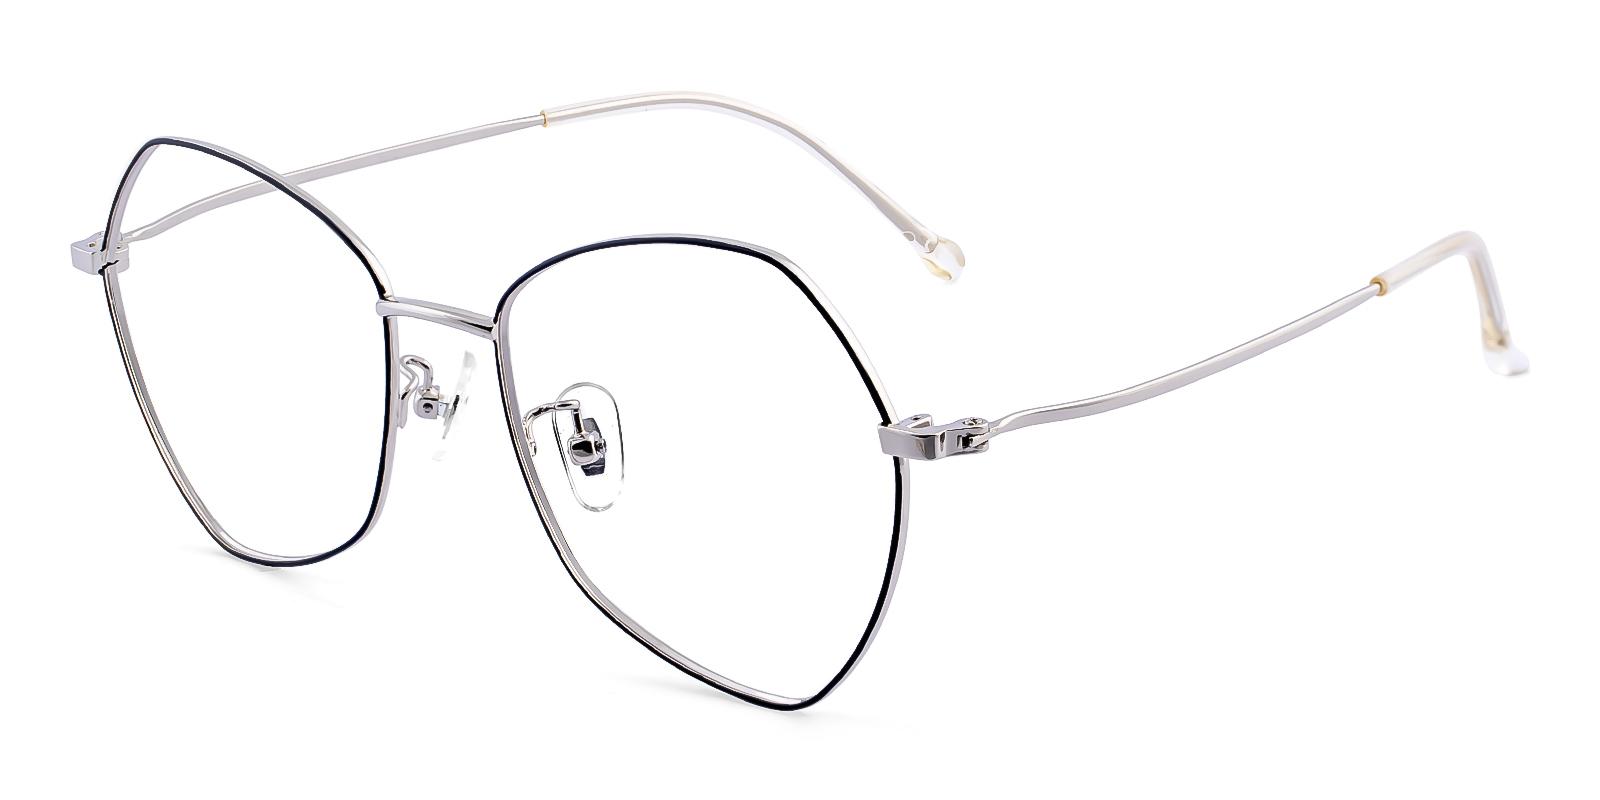 Thellet Silver Metal Eyeglasses , NosePads Frames from ABBE Glasses